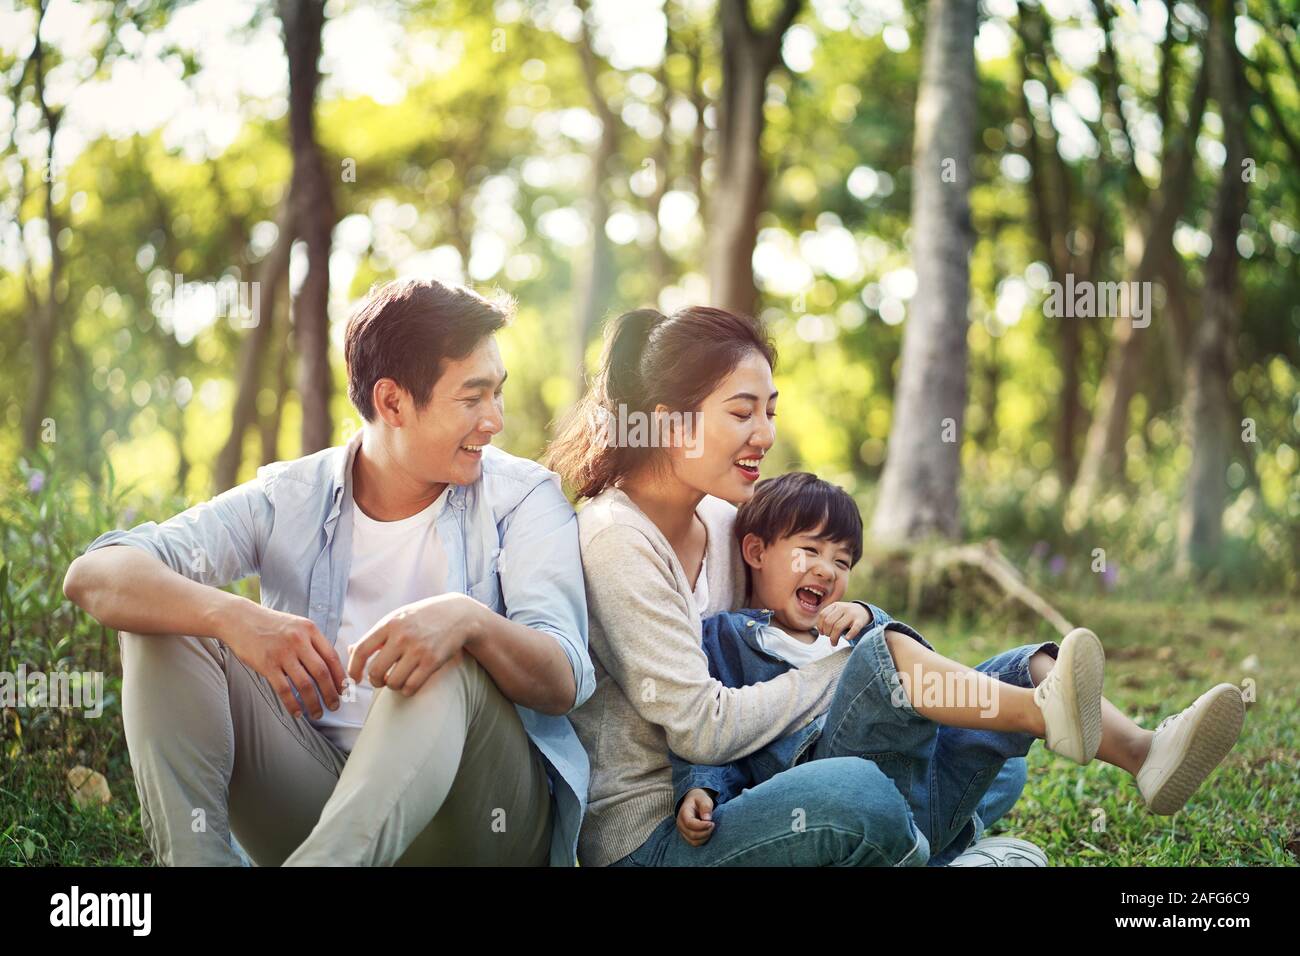 young asian parents and son having fun outdoors in park Stock Photo